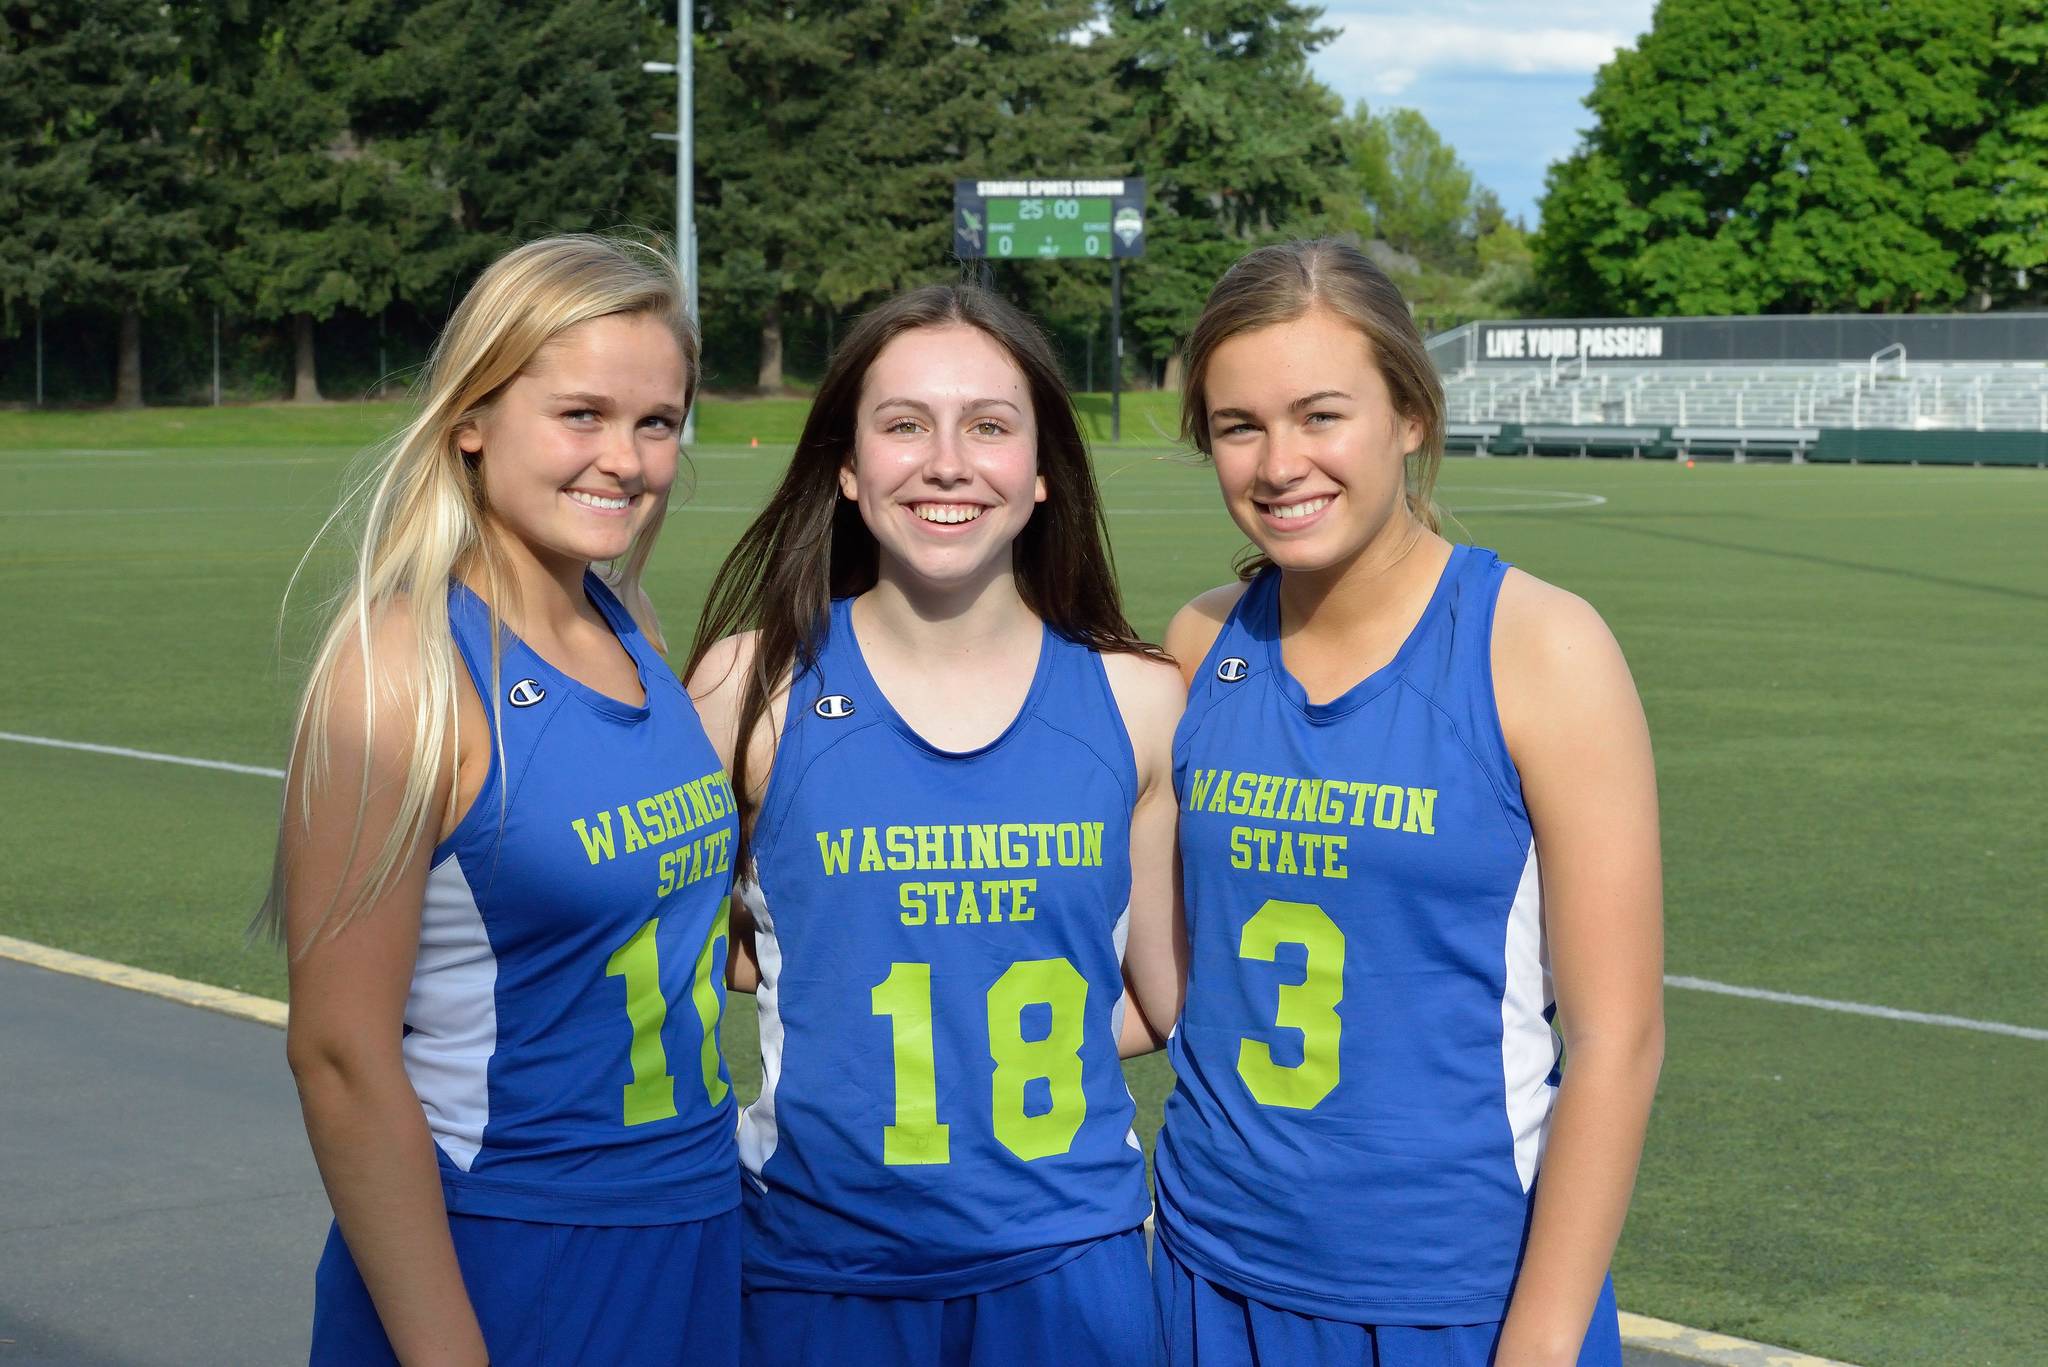 Photo courtesy of Mercer Island Girls Lacrosse                                Mercer Island Islanders girls lacrosse varsity players Katie Brodsky, Tessa Guerra and Julia Nordstrom are members of the Team Washington girls lacrosse team, which will compete at the U-19 women’s National Tournament taking place on May 27-28 at Yale University in New Haven, Connecticut. There will be close to 70 teams in attendance at the tournament.